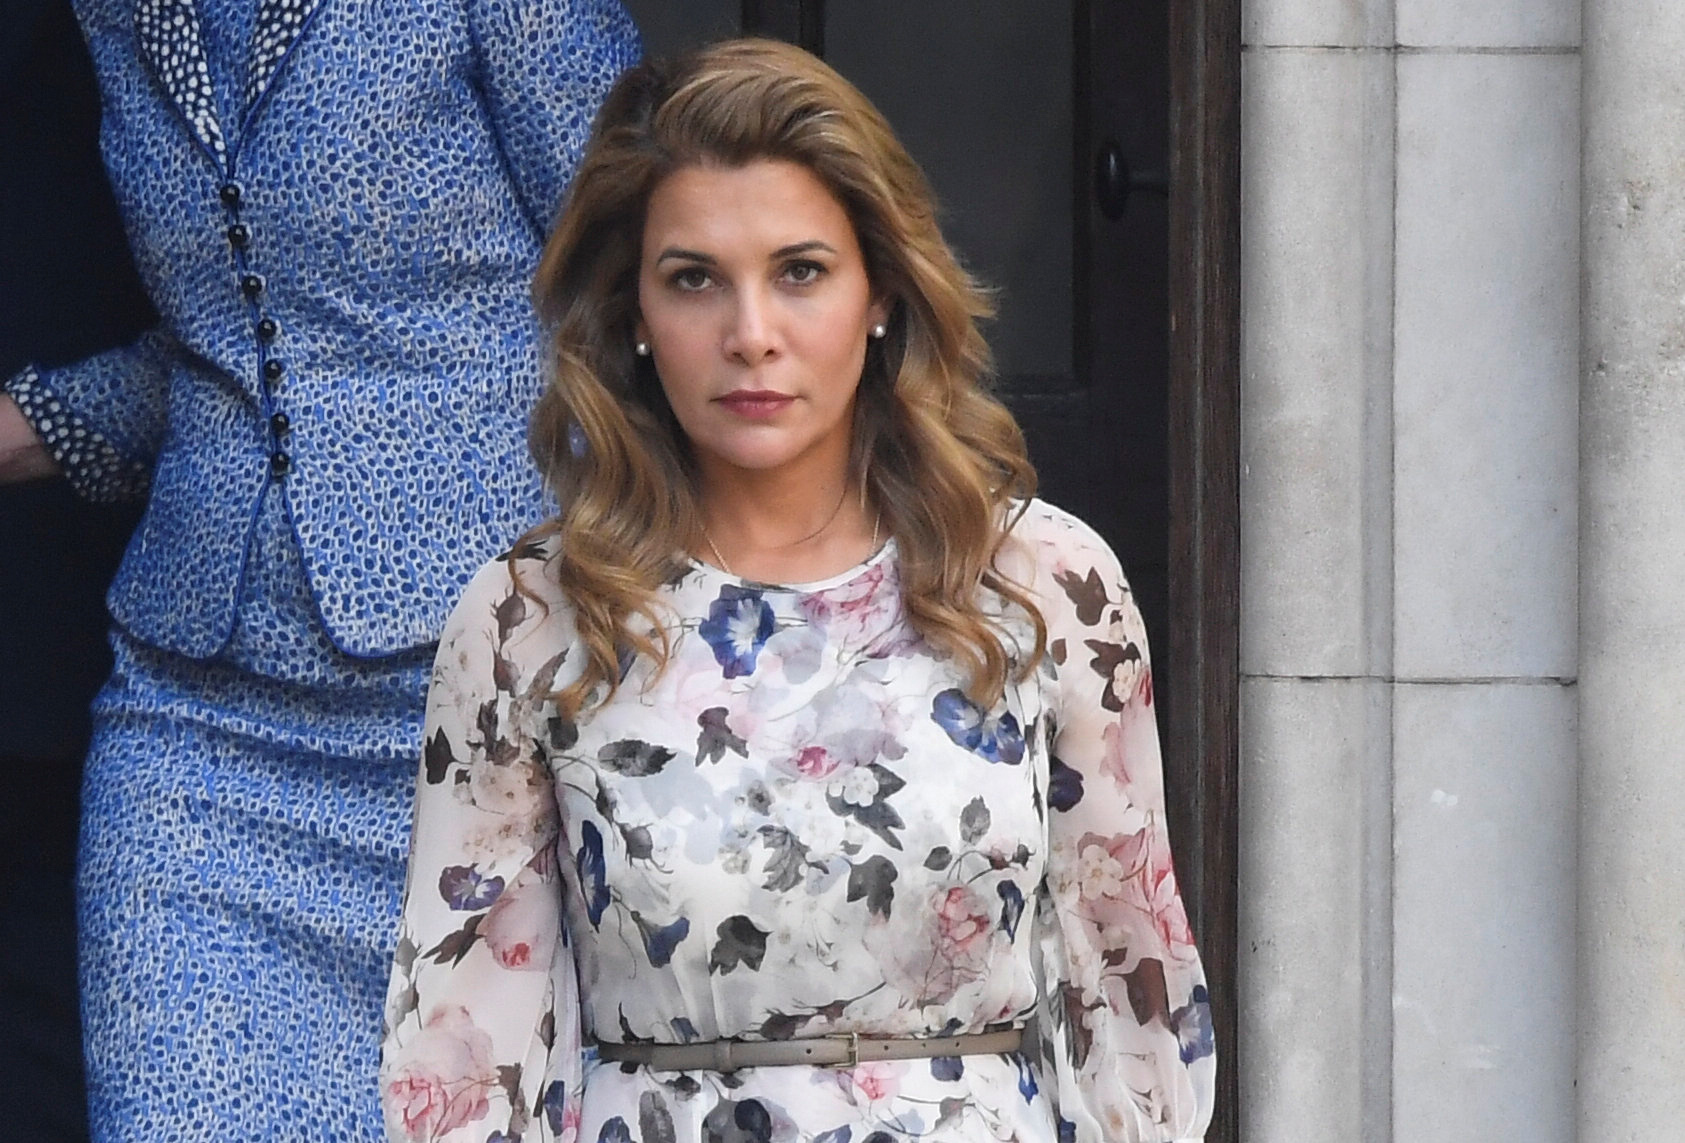 Princess Haya bint Al Hussein leaves the Royal Courts of Justice in London, Britain July 31, 2019.  REUTERS/Toby Melville